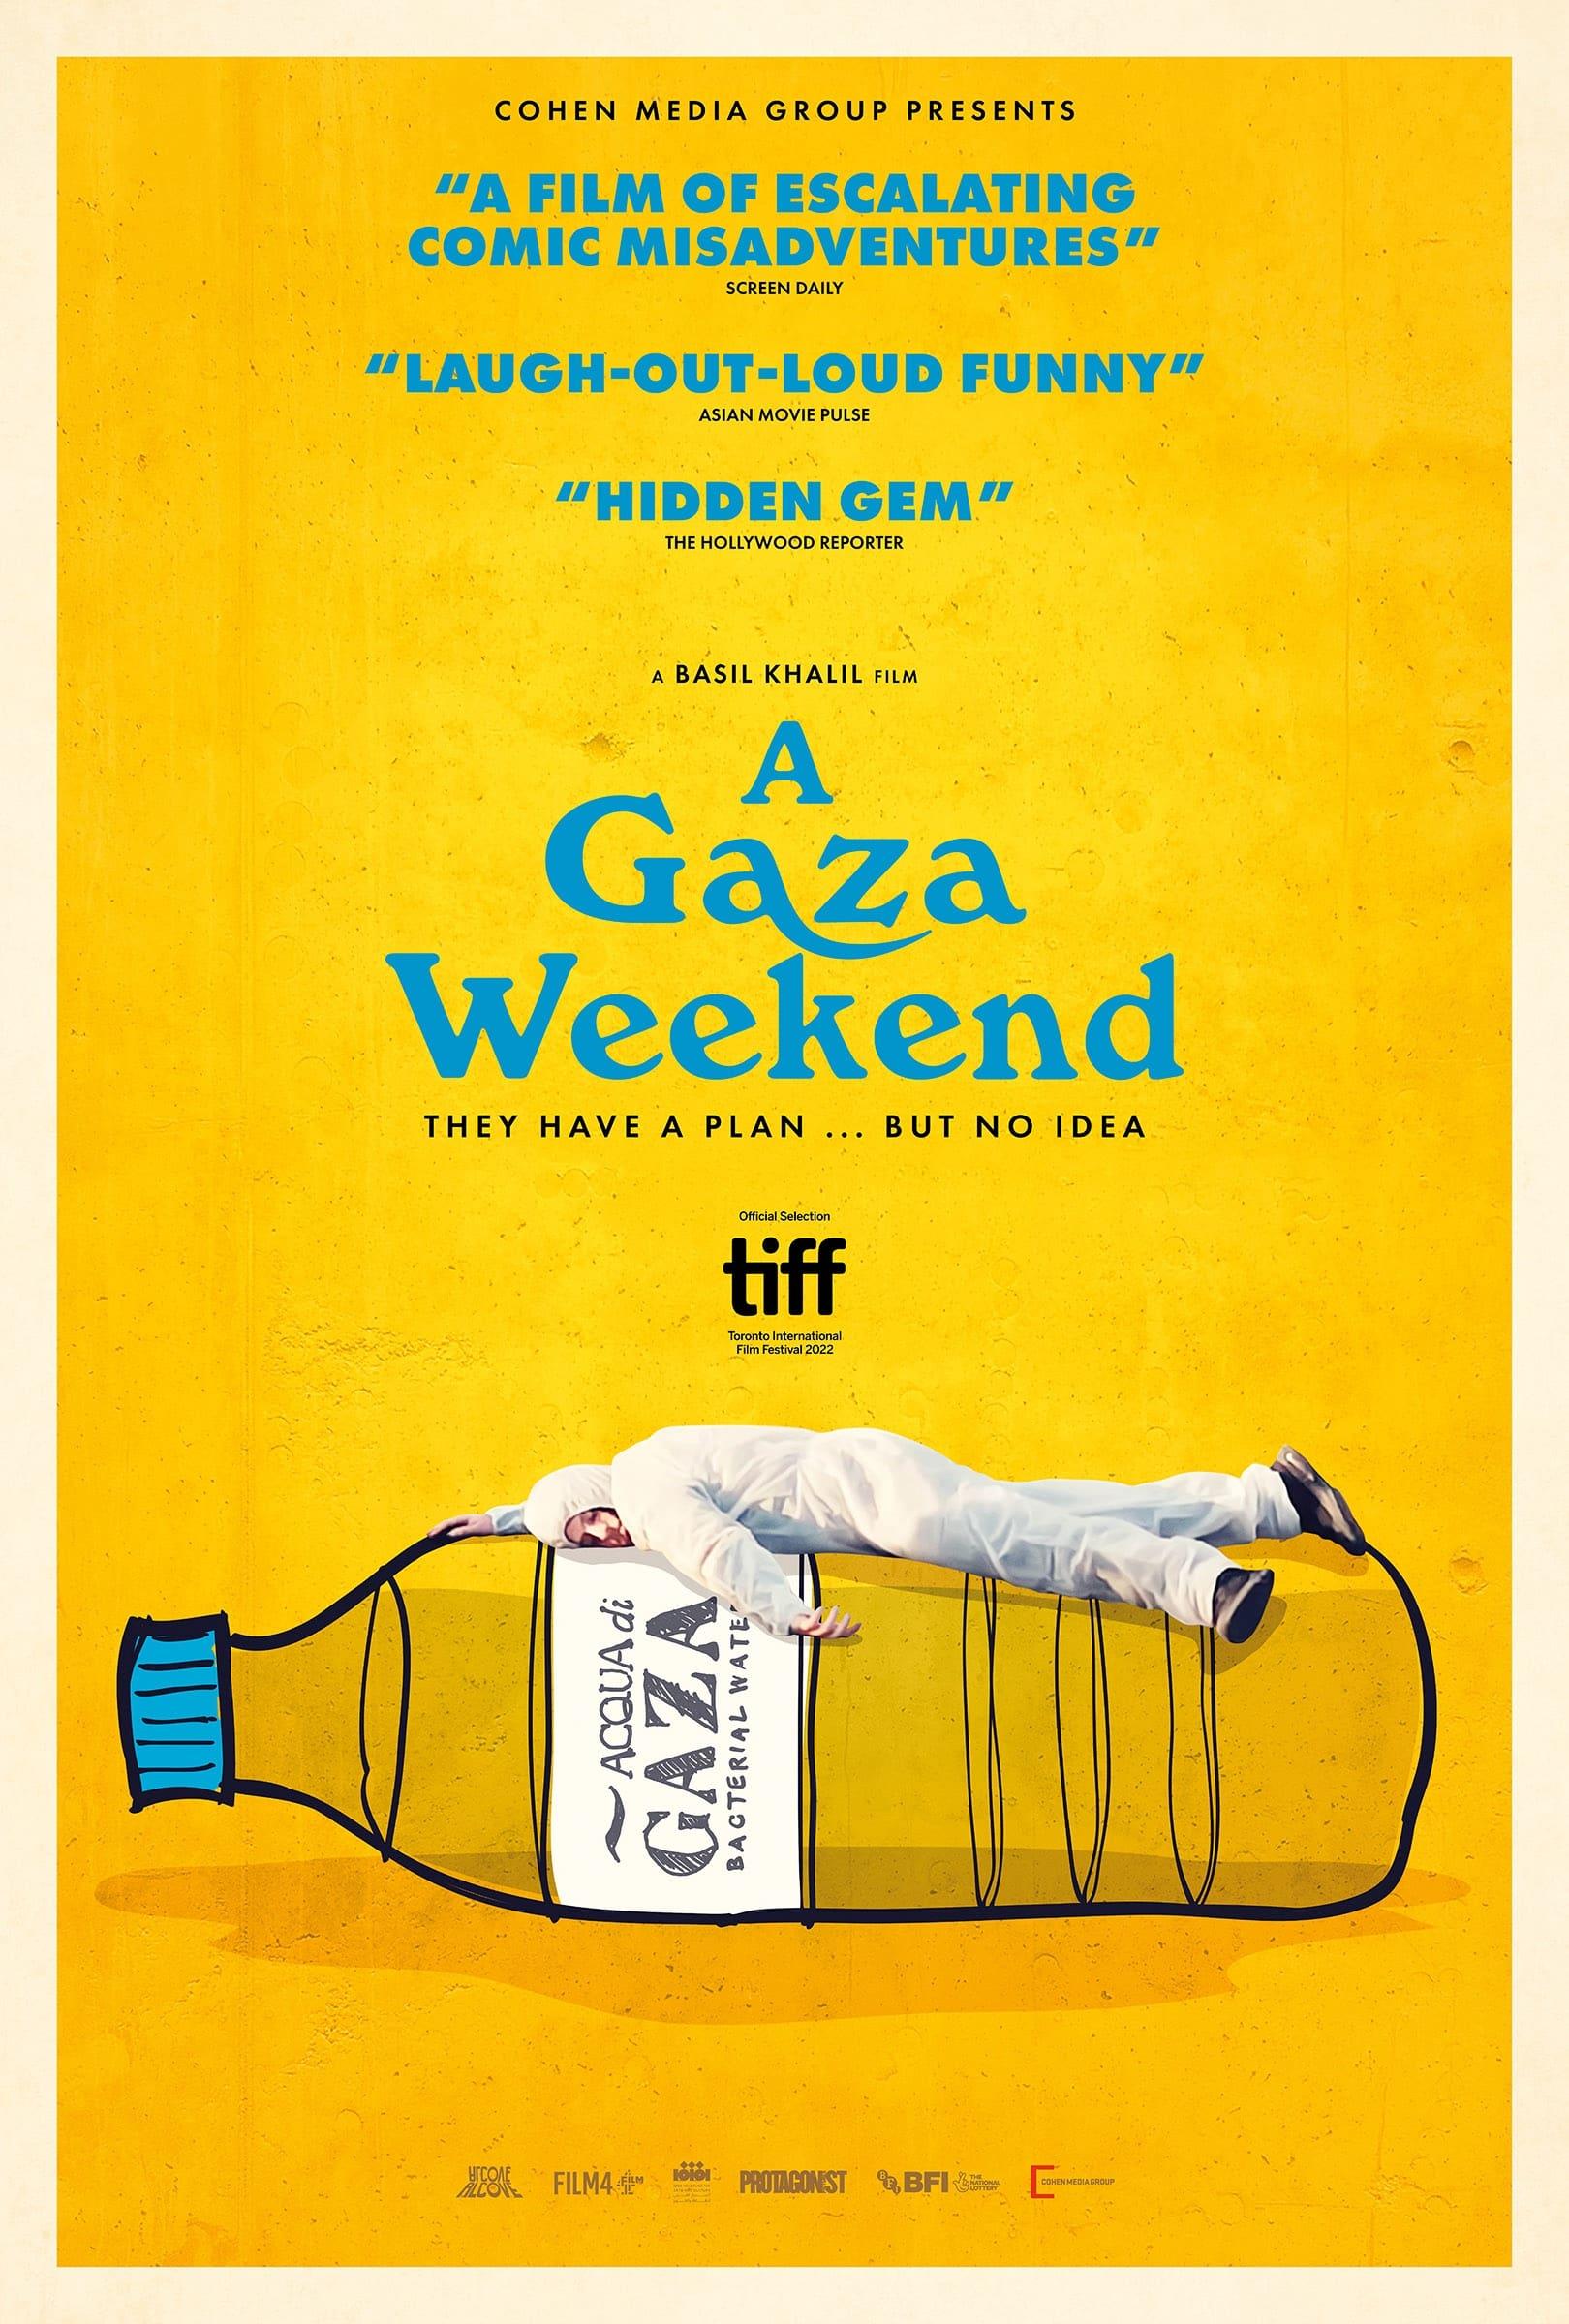 A Gaza Weekend poster